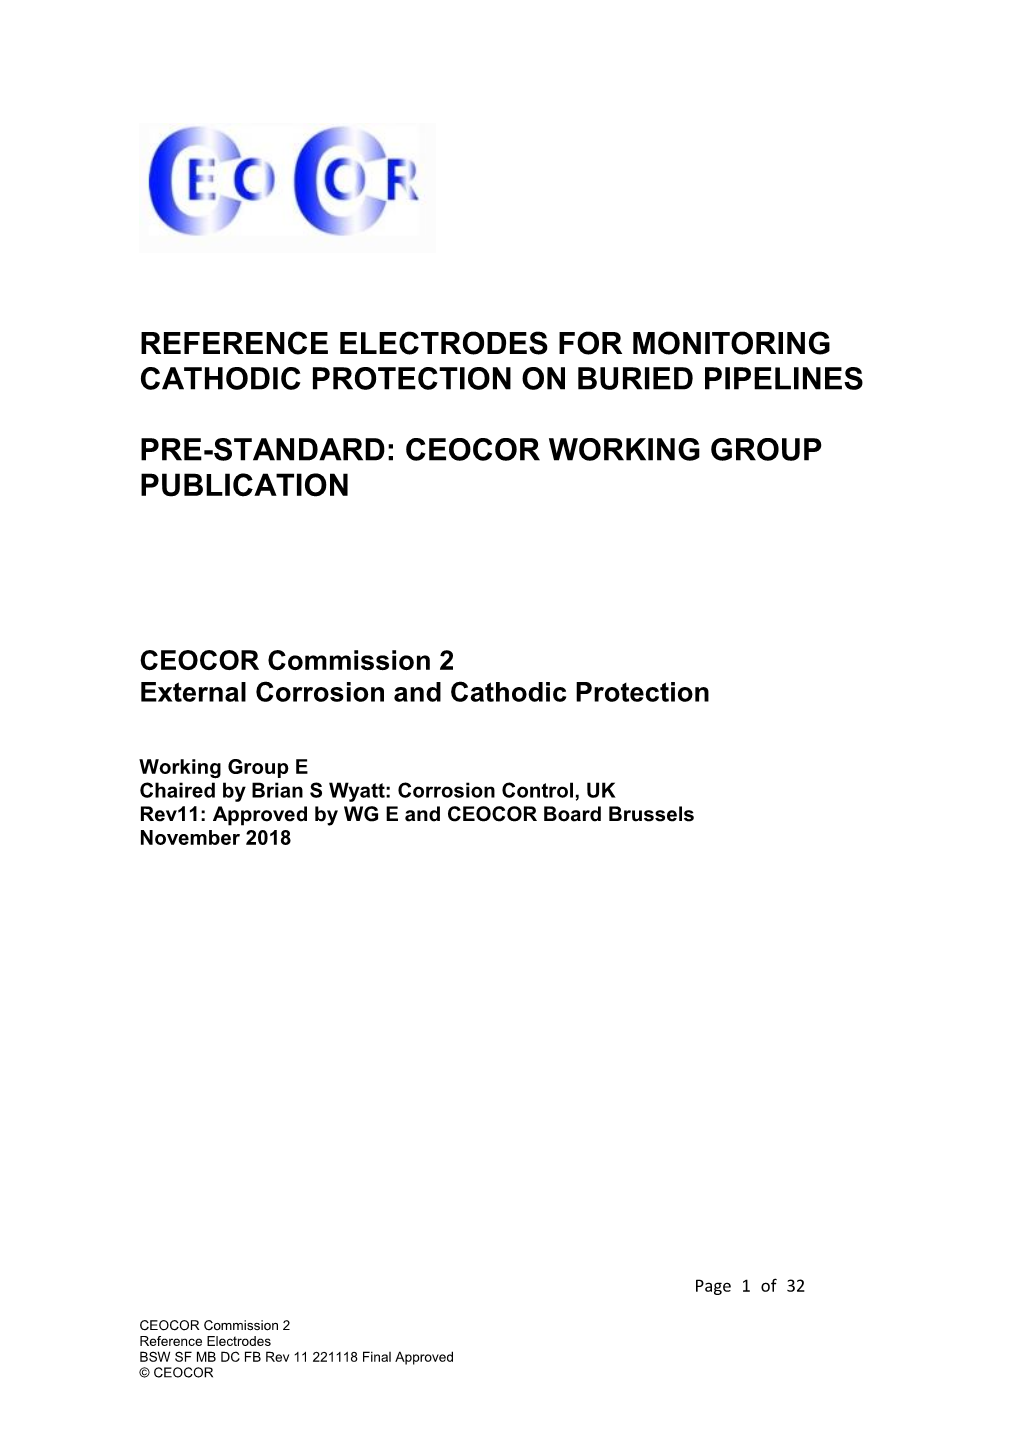 Reference Electrodes for Monitoring of Cathodic Protection